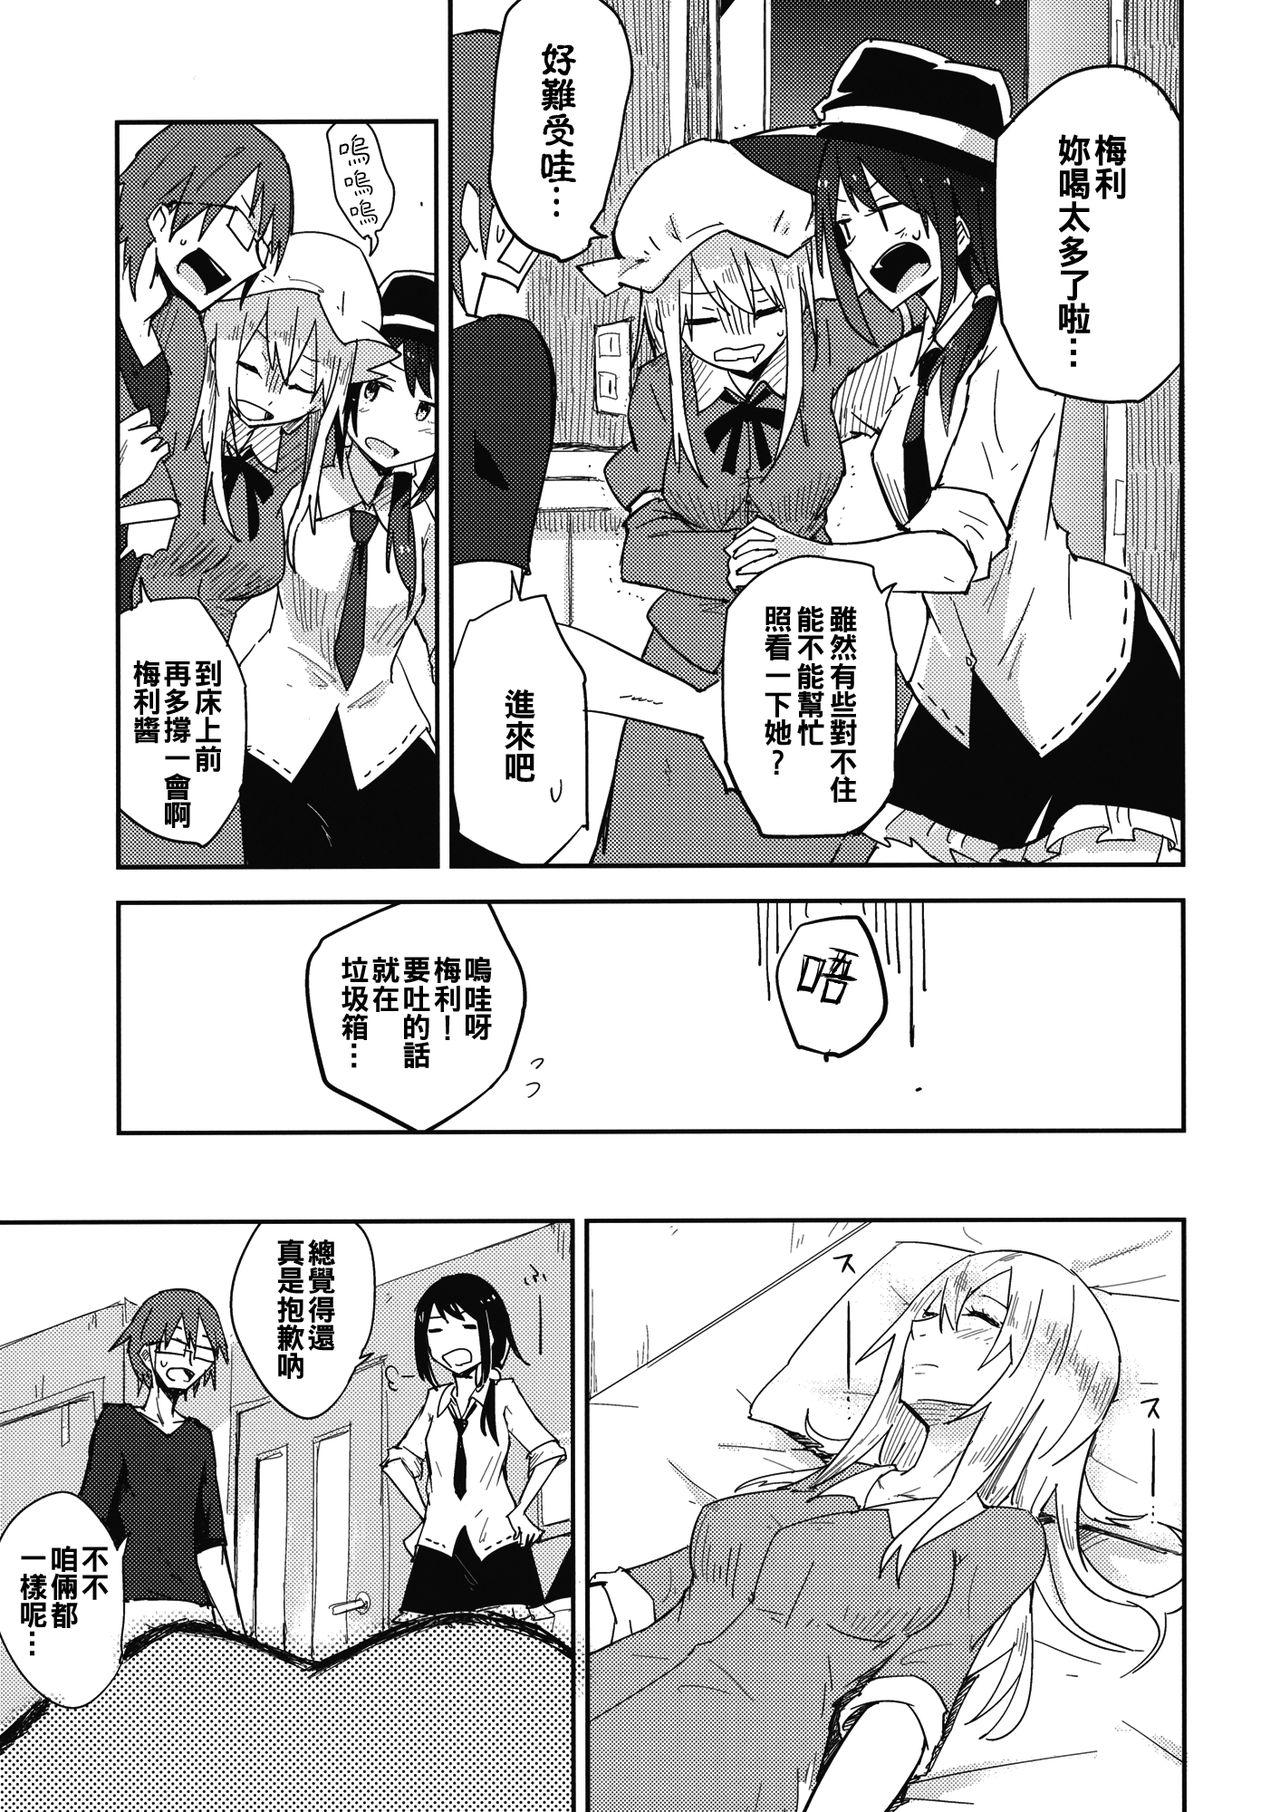 Yanks Featured Himitsu no. - Touhou project Old And Young - Page 5